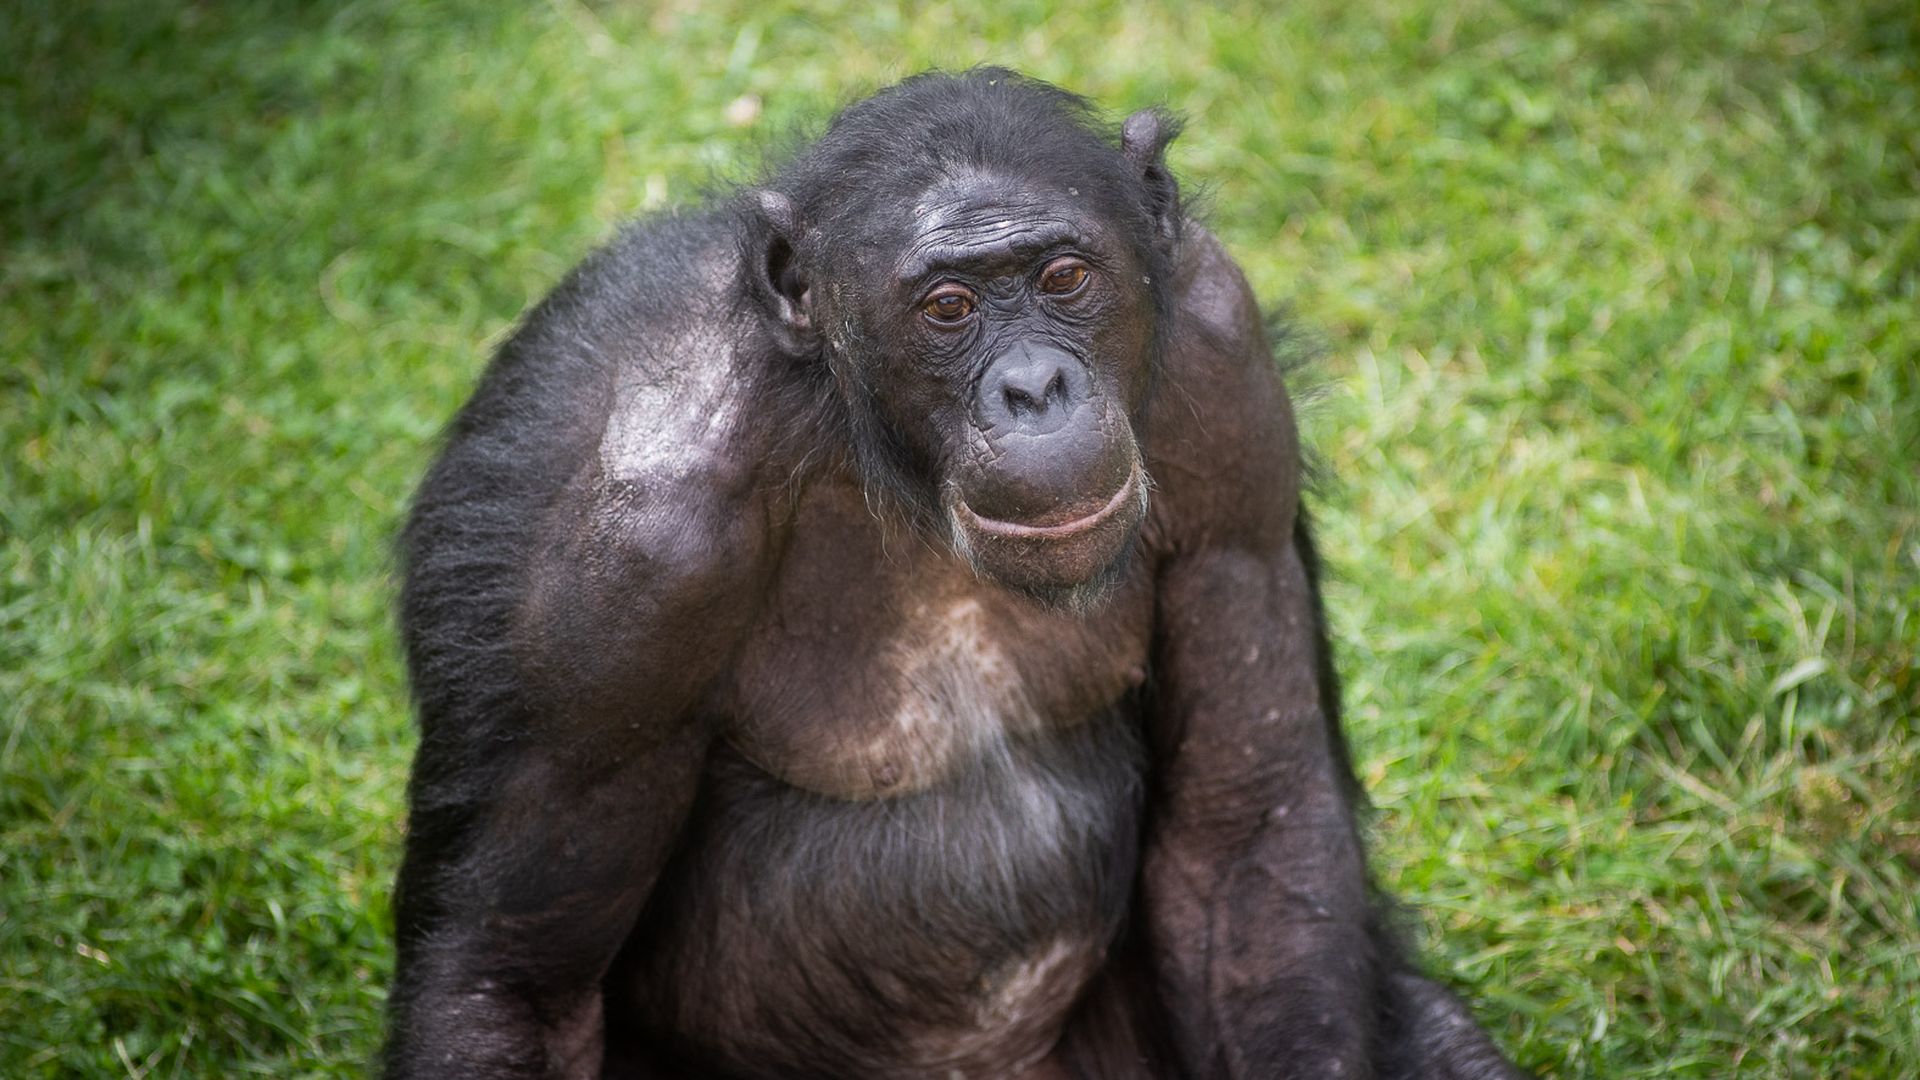 A close-up photo of Jimmy the bonobo